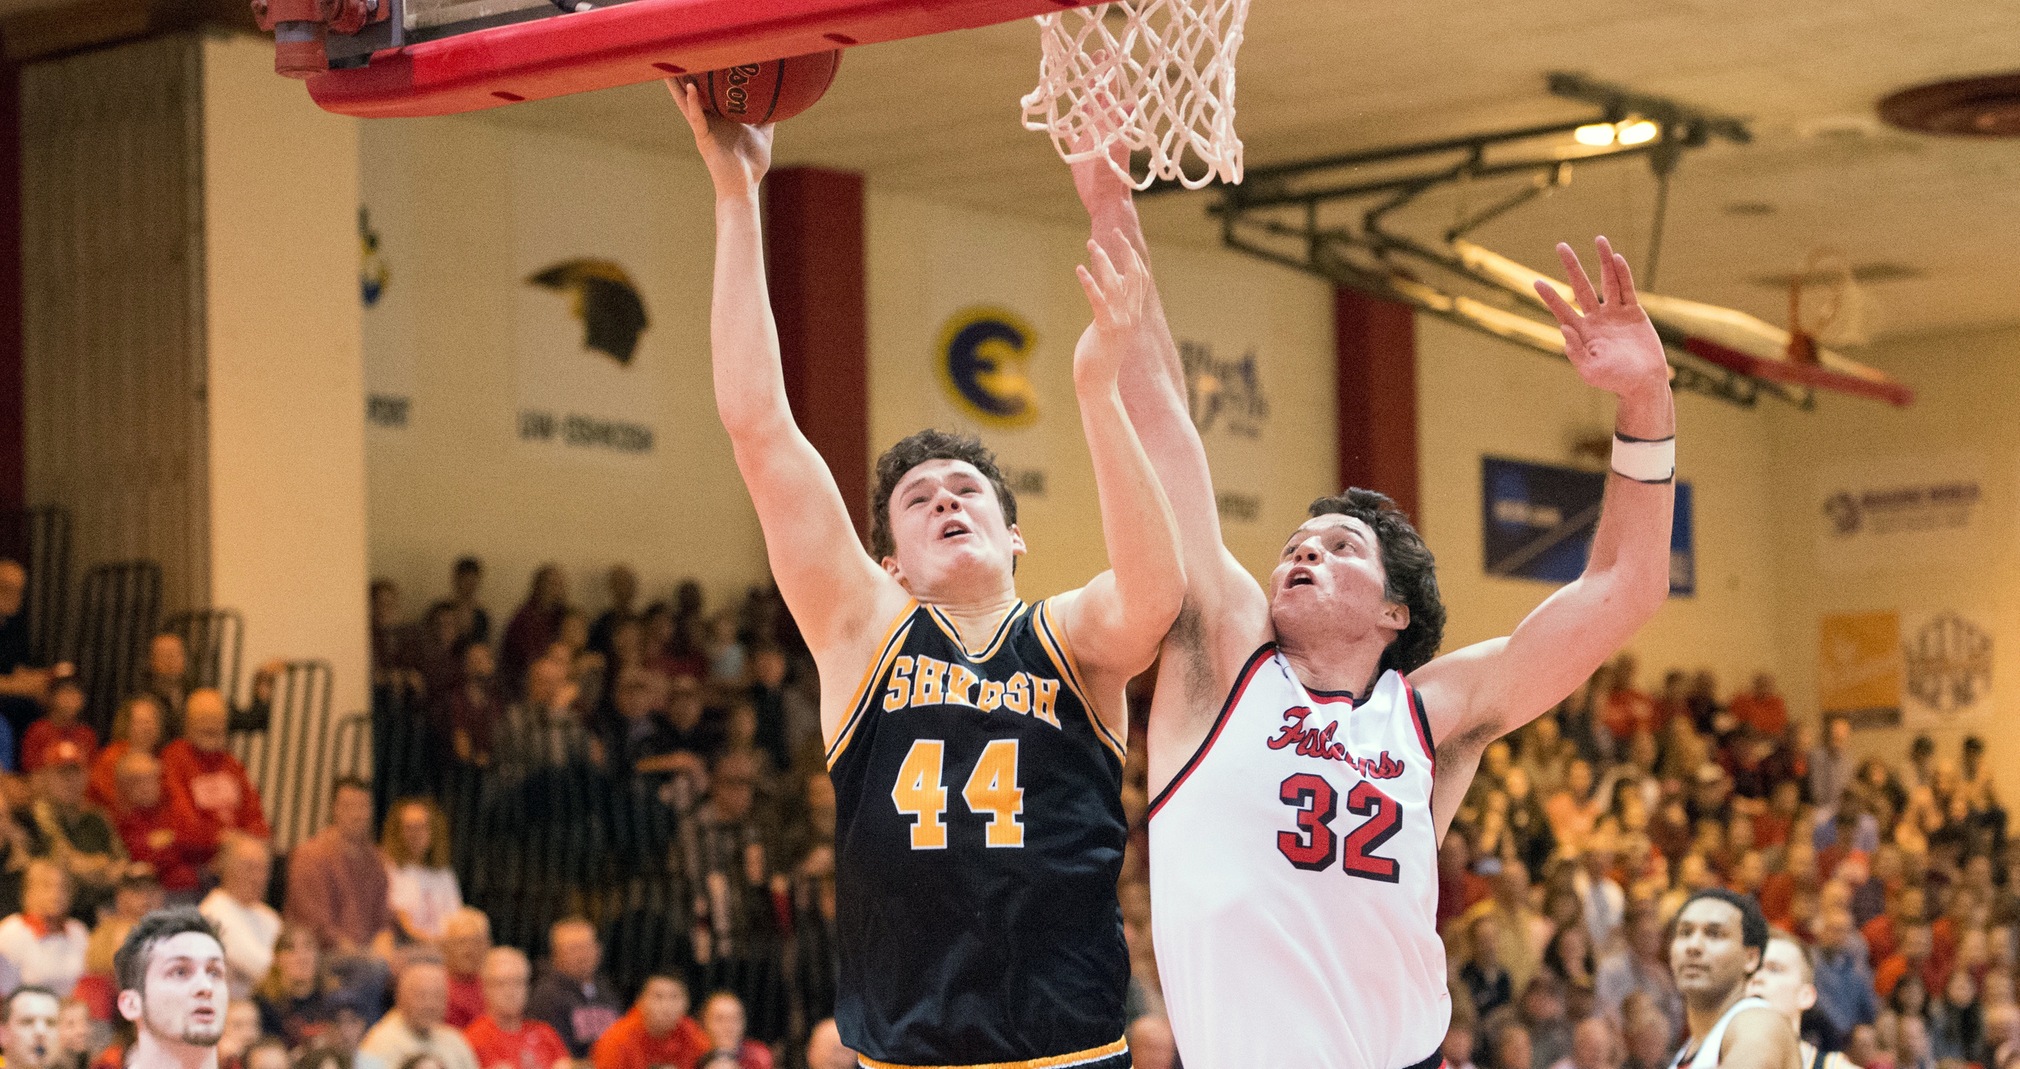 Jack Flynn scored six points, grabbed three rebounds and recorded two blocks during the WIAC Championship Final.